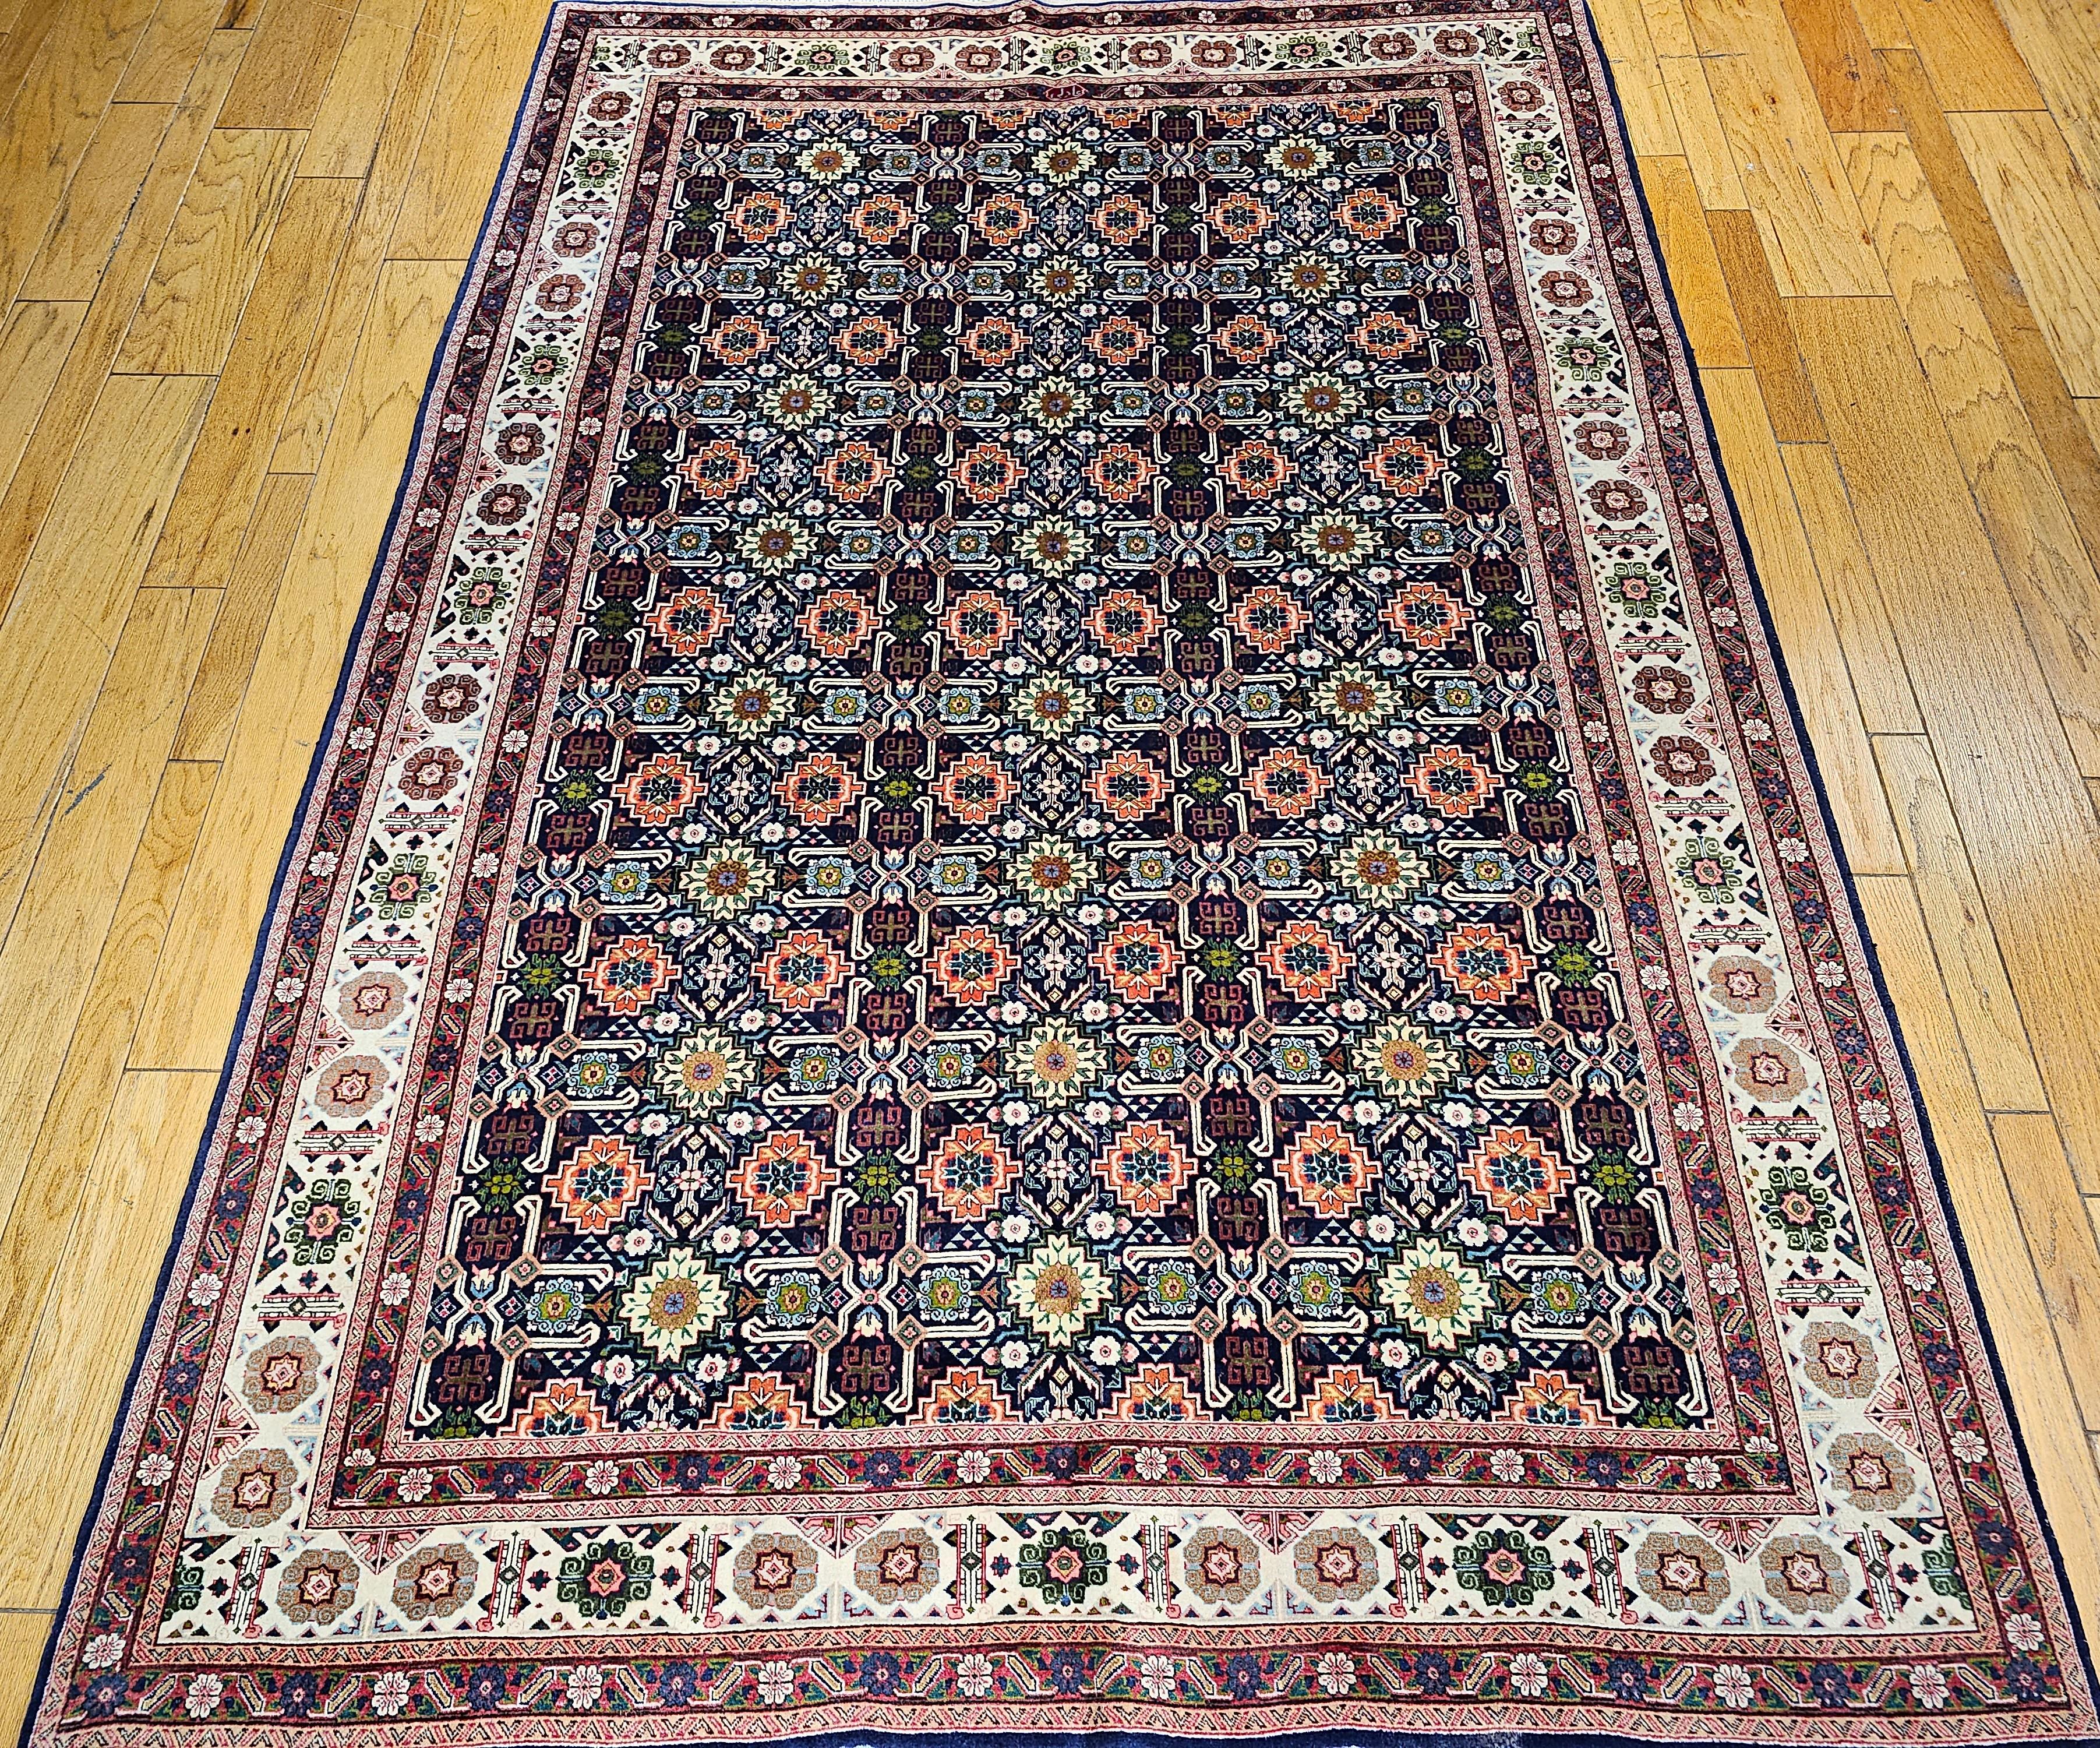 This antique Tabriz rug is following the design of the Caucasian Kuba and Shirvan rugs from the 19th century in the 